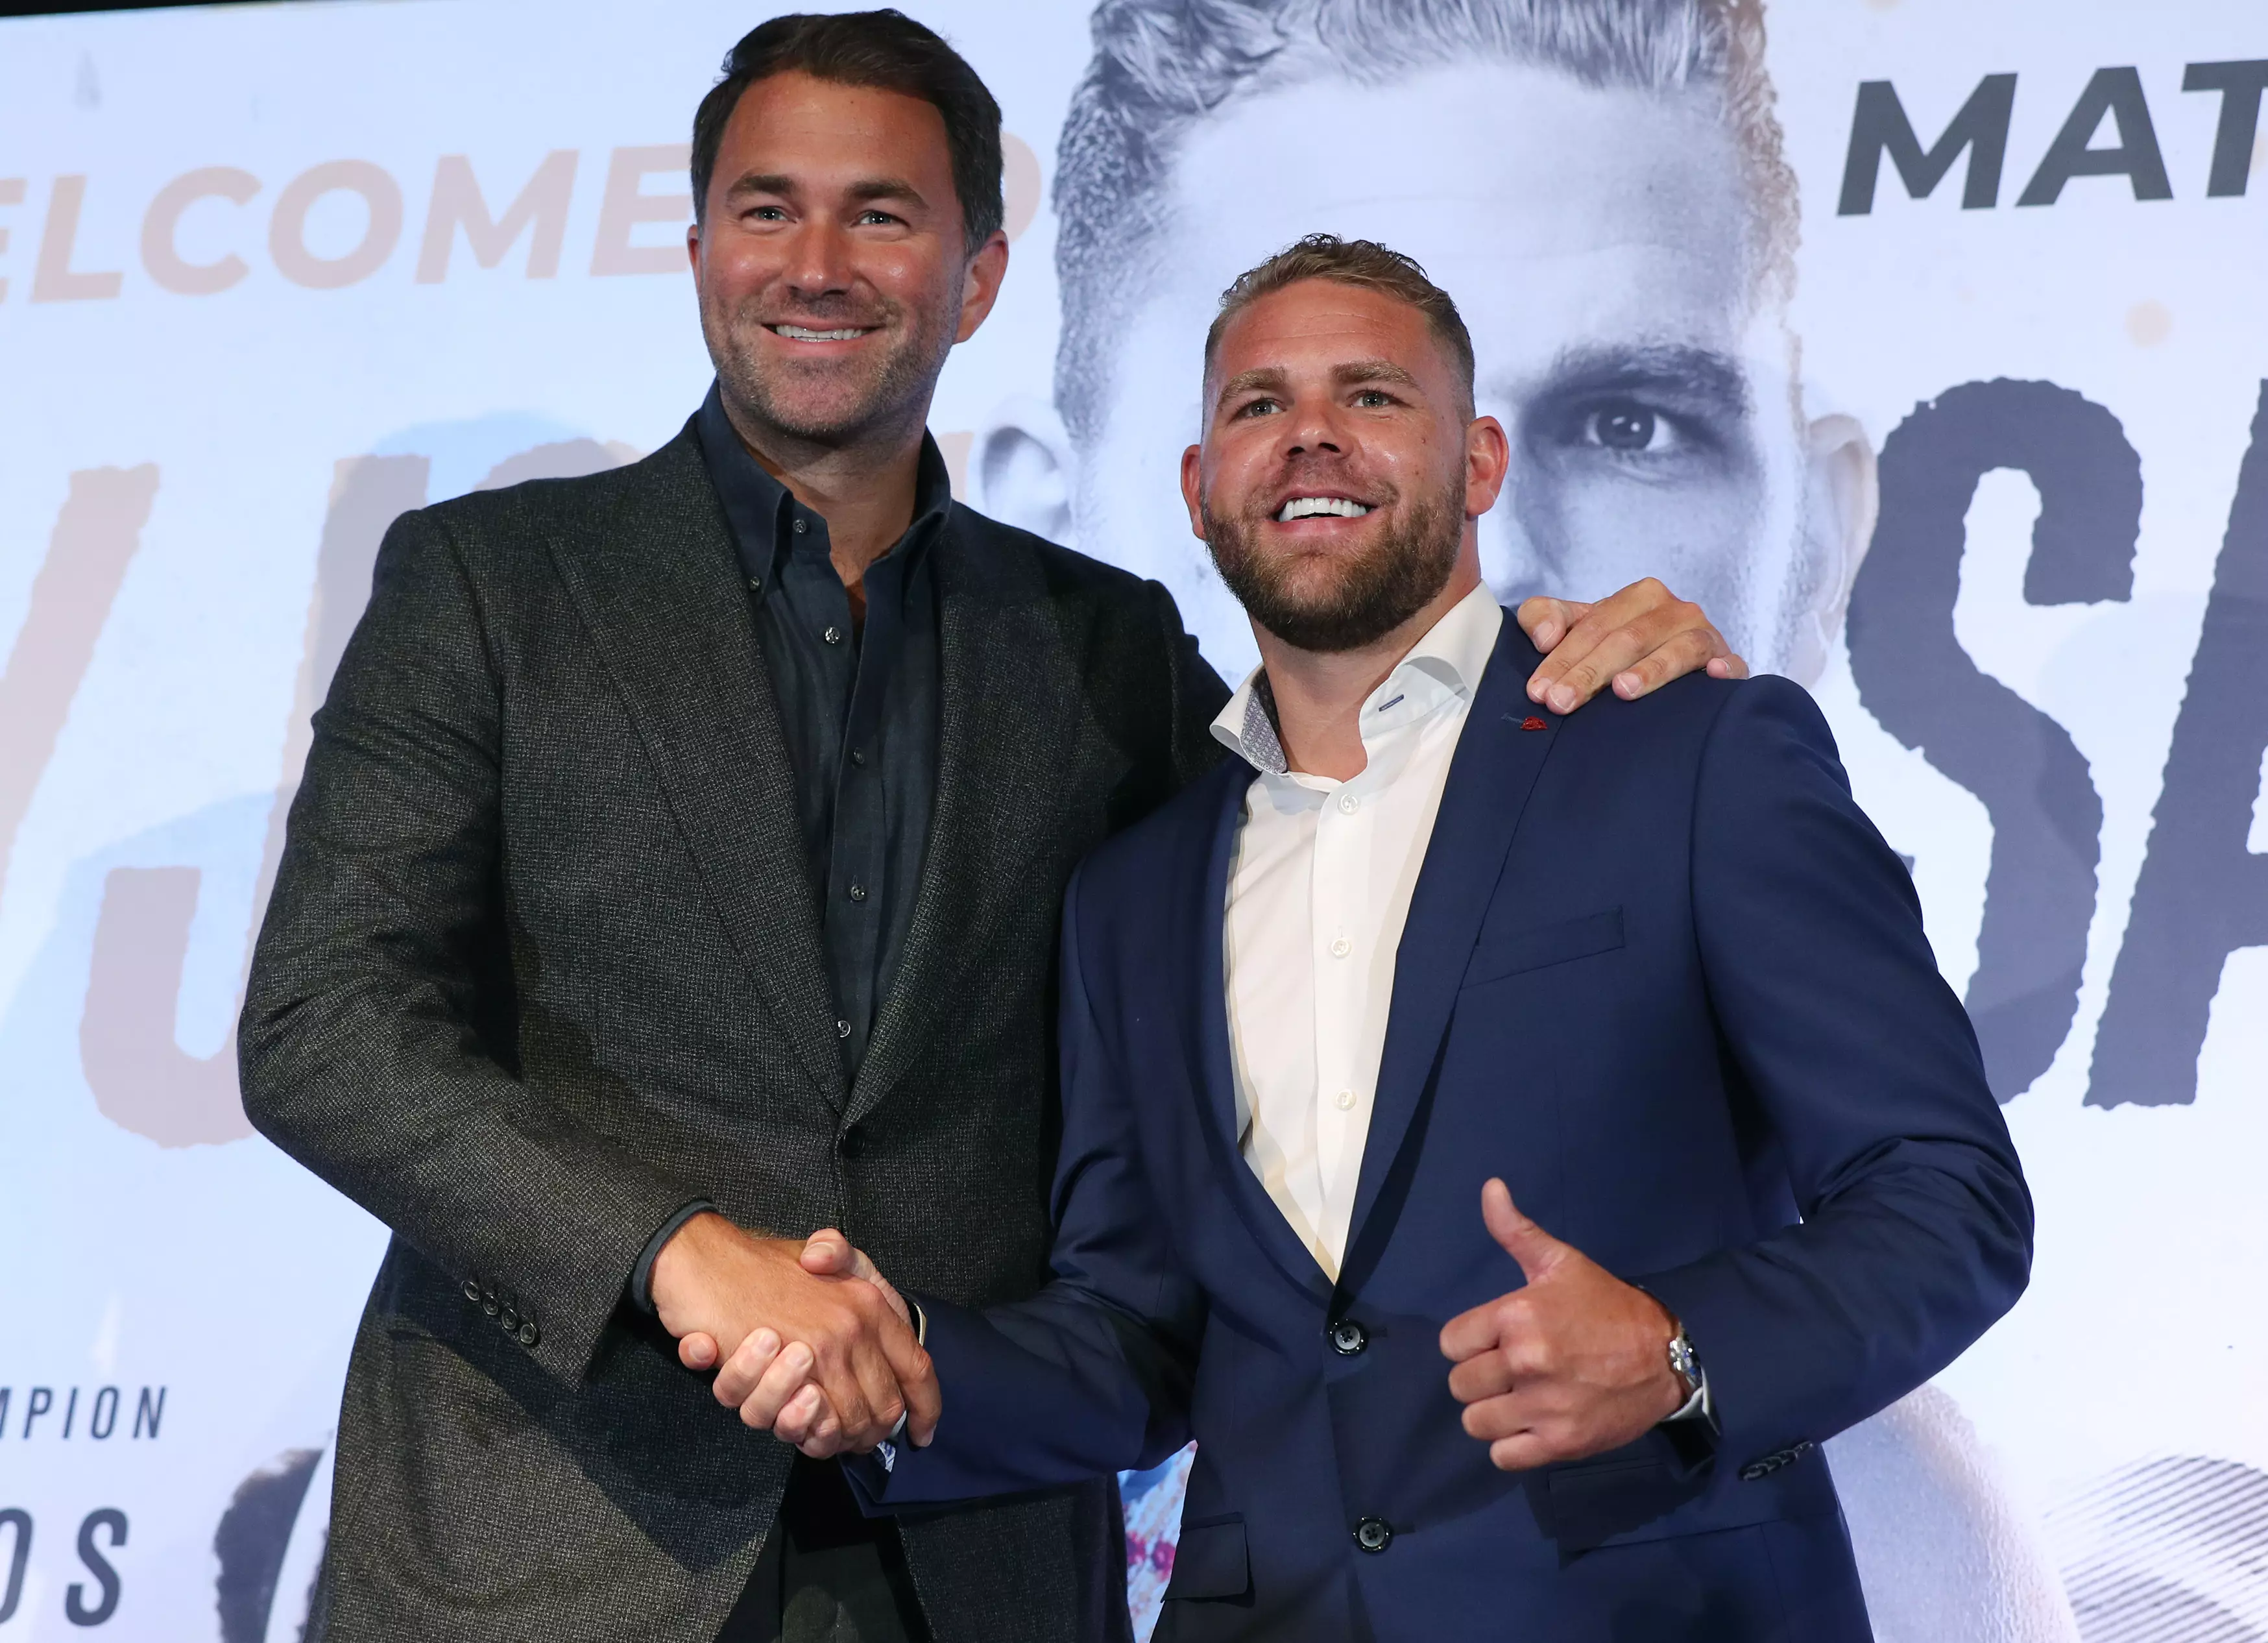 Saunders only signed up with Matchroom Boxing last month. Image: PA Images